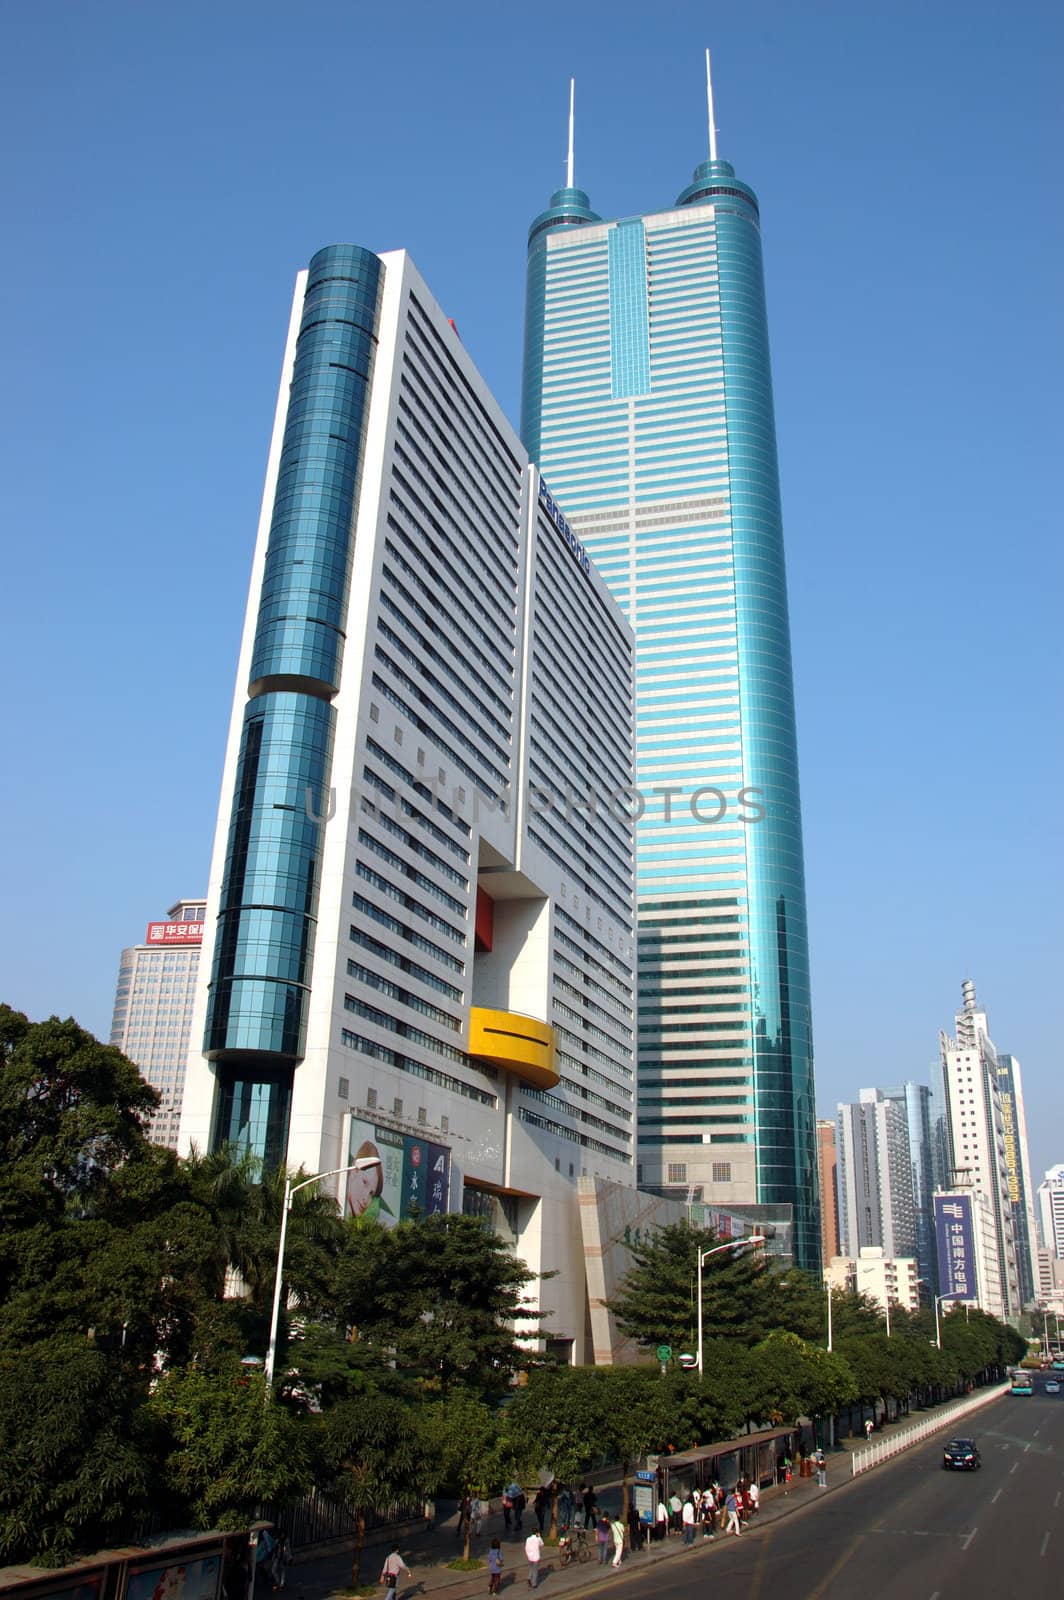 SHENZHEN, CHINA - OCTOBER 31: Modern skyscrapers in Luohu district, Shenzhen on October 31, 2010. This year is 30th anniversary for Shenzhen special economic zone.